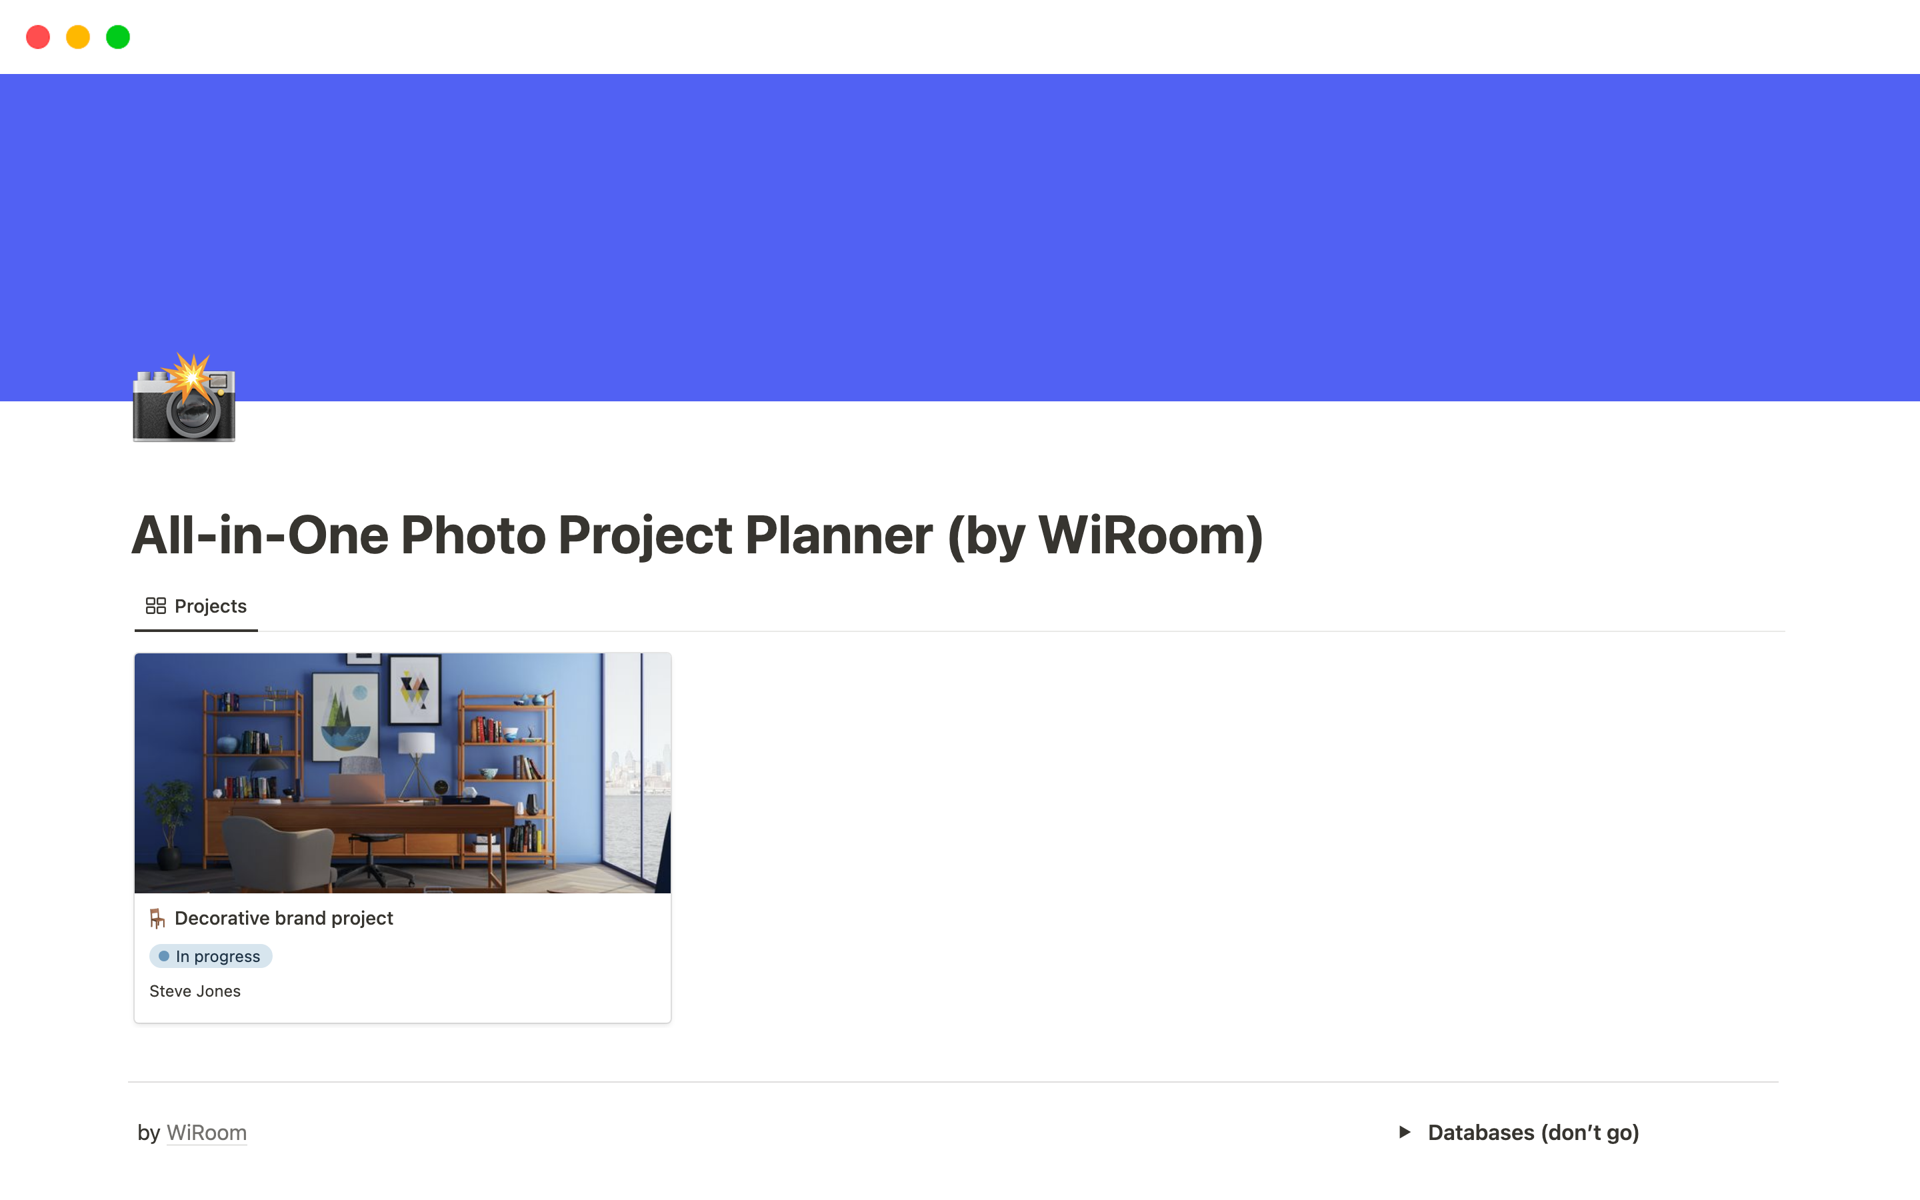 All-in-One Photo Project Planner (by WiRoom)のテンプレートのプレビュー